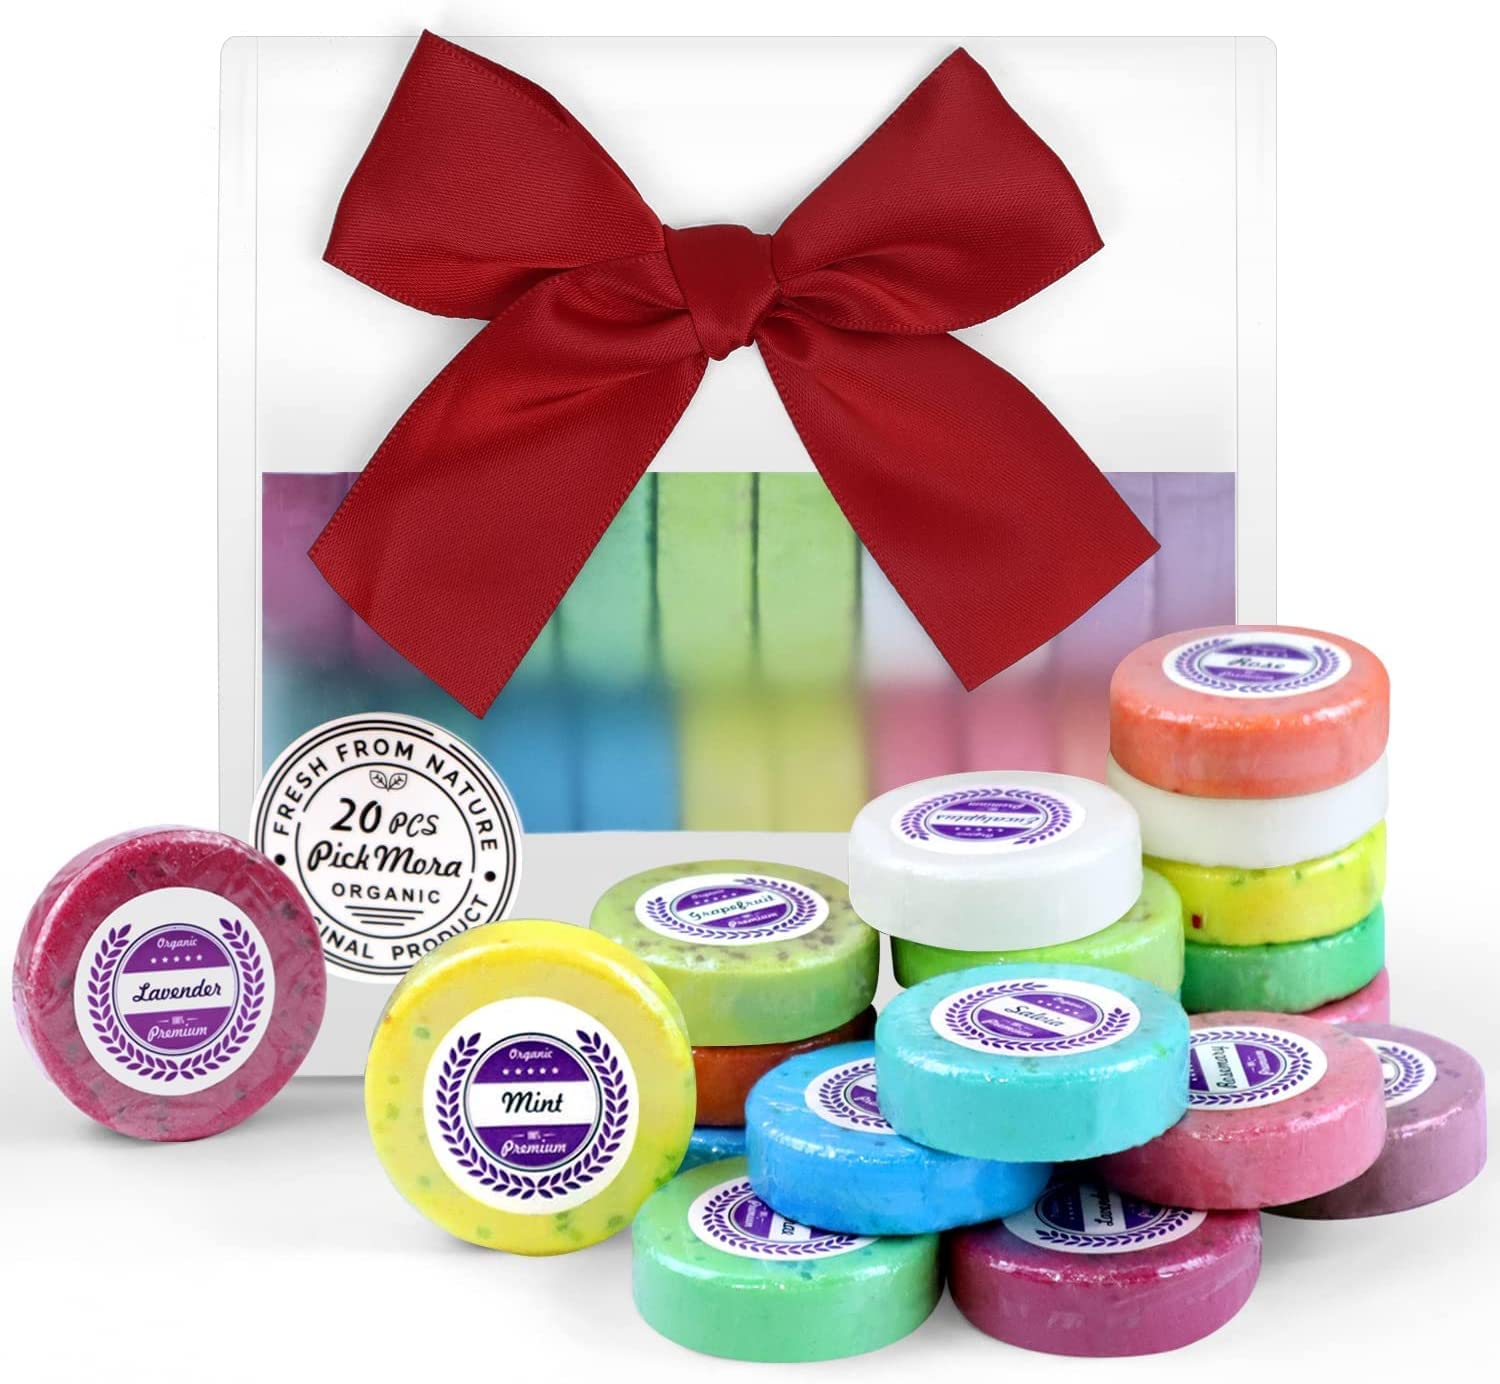 Shower Steamers, 10 Scents (Pack of 20) Aromatherapy Shower Bombs, Vaporizing Spa Shower with Essential Oils for Relaxation - Self Care and Relaxation for Mom and Dad, Christmas Velentine's Day Gifts